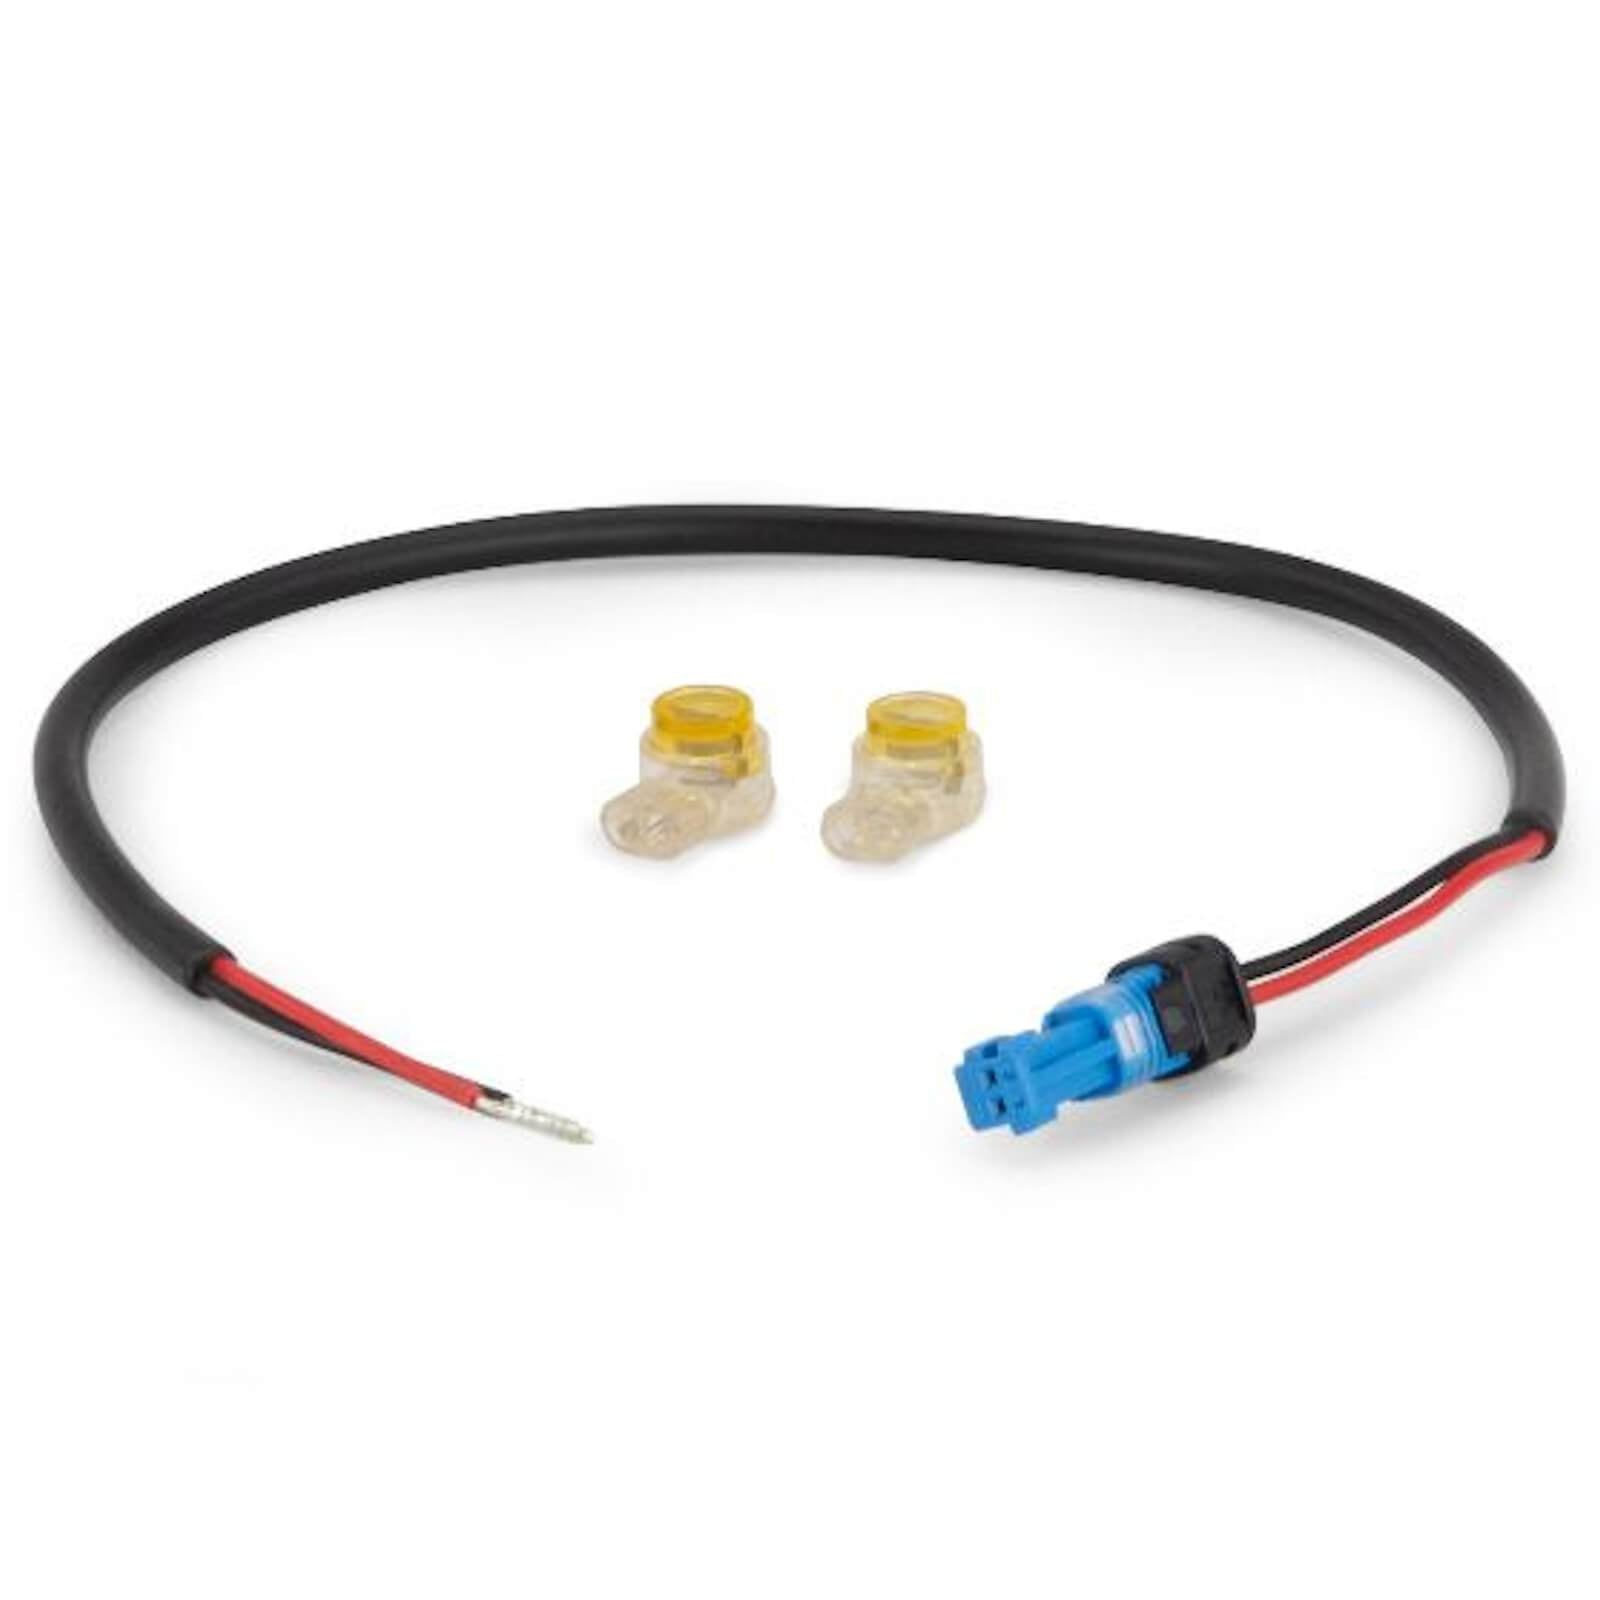 USE Exposure Bosch eBike Connection Cable For Electric Bike Lights